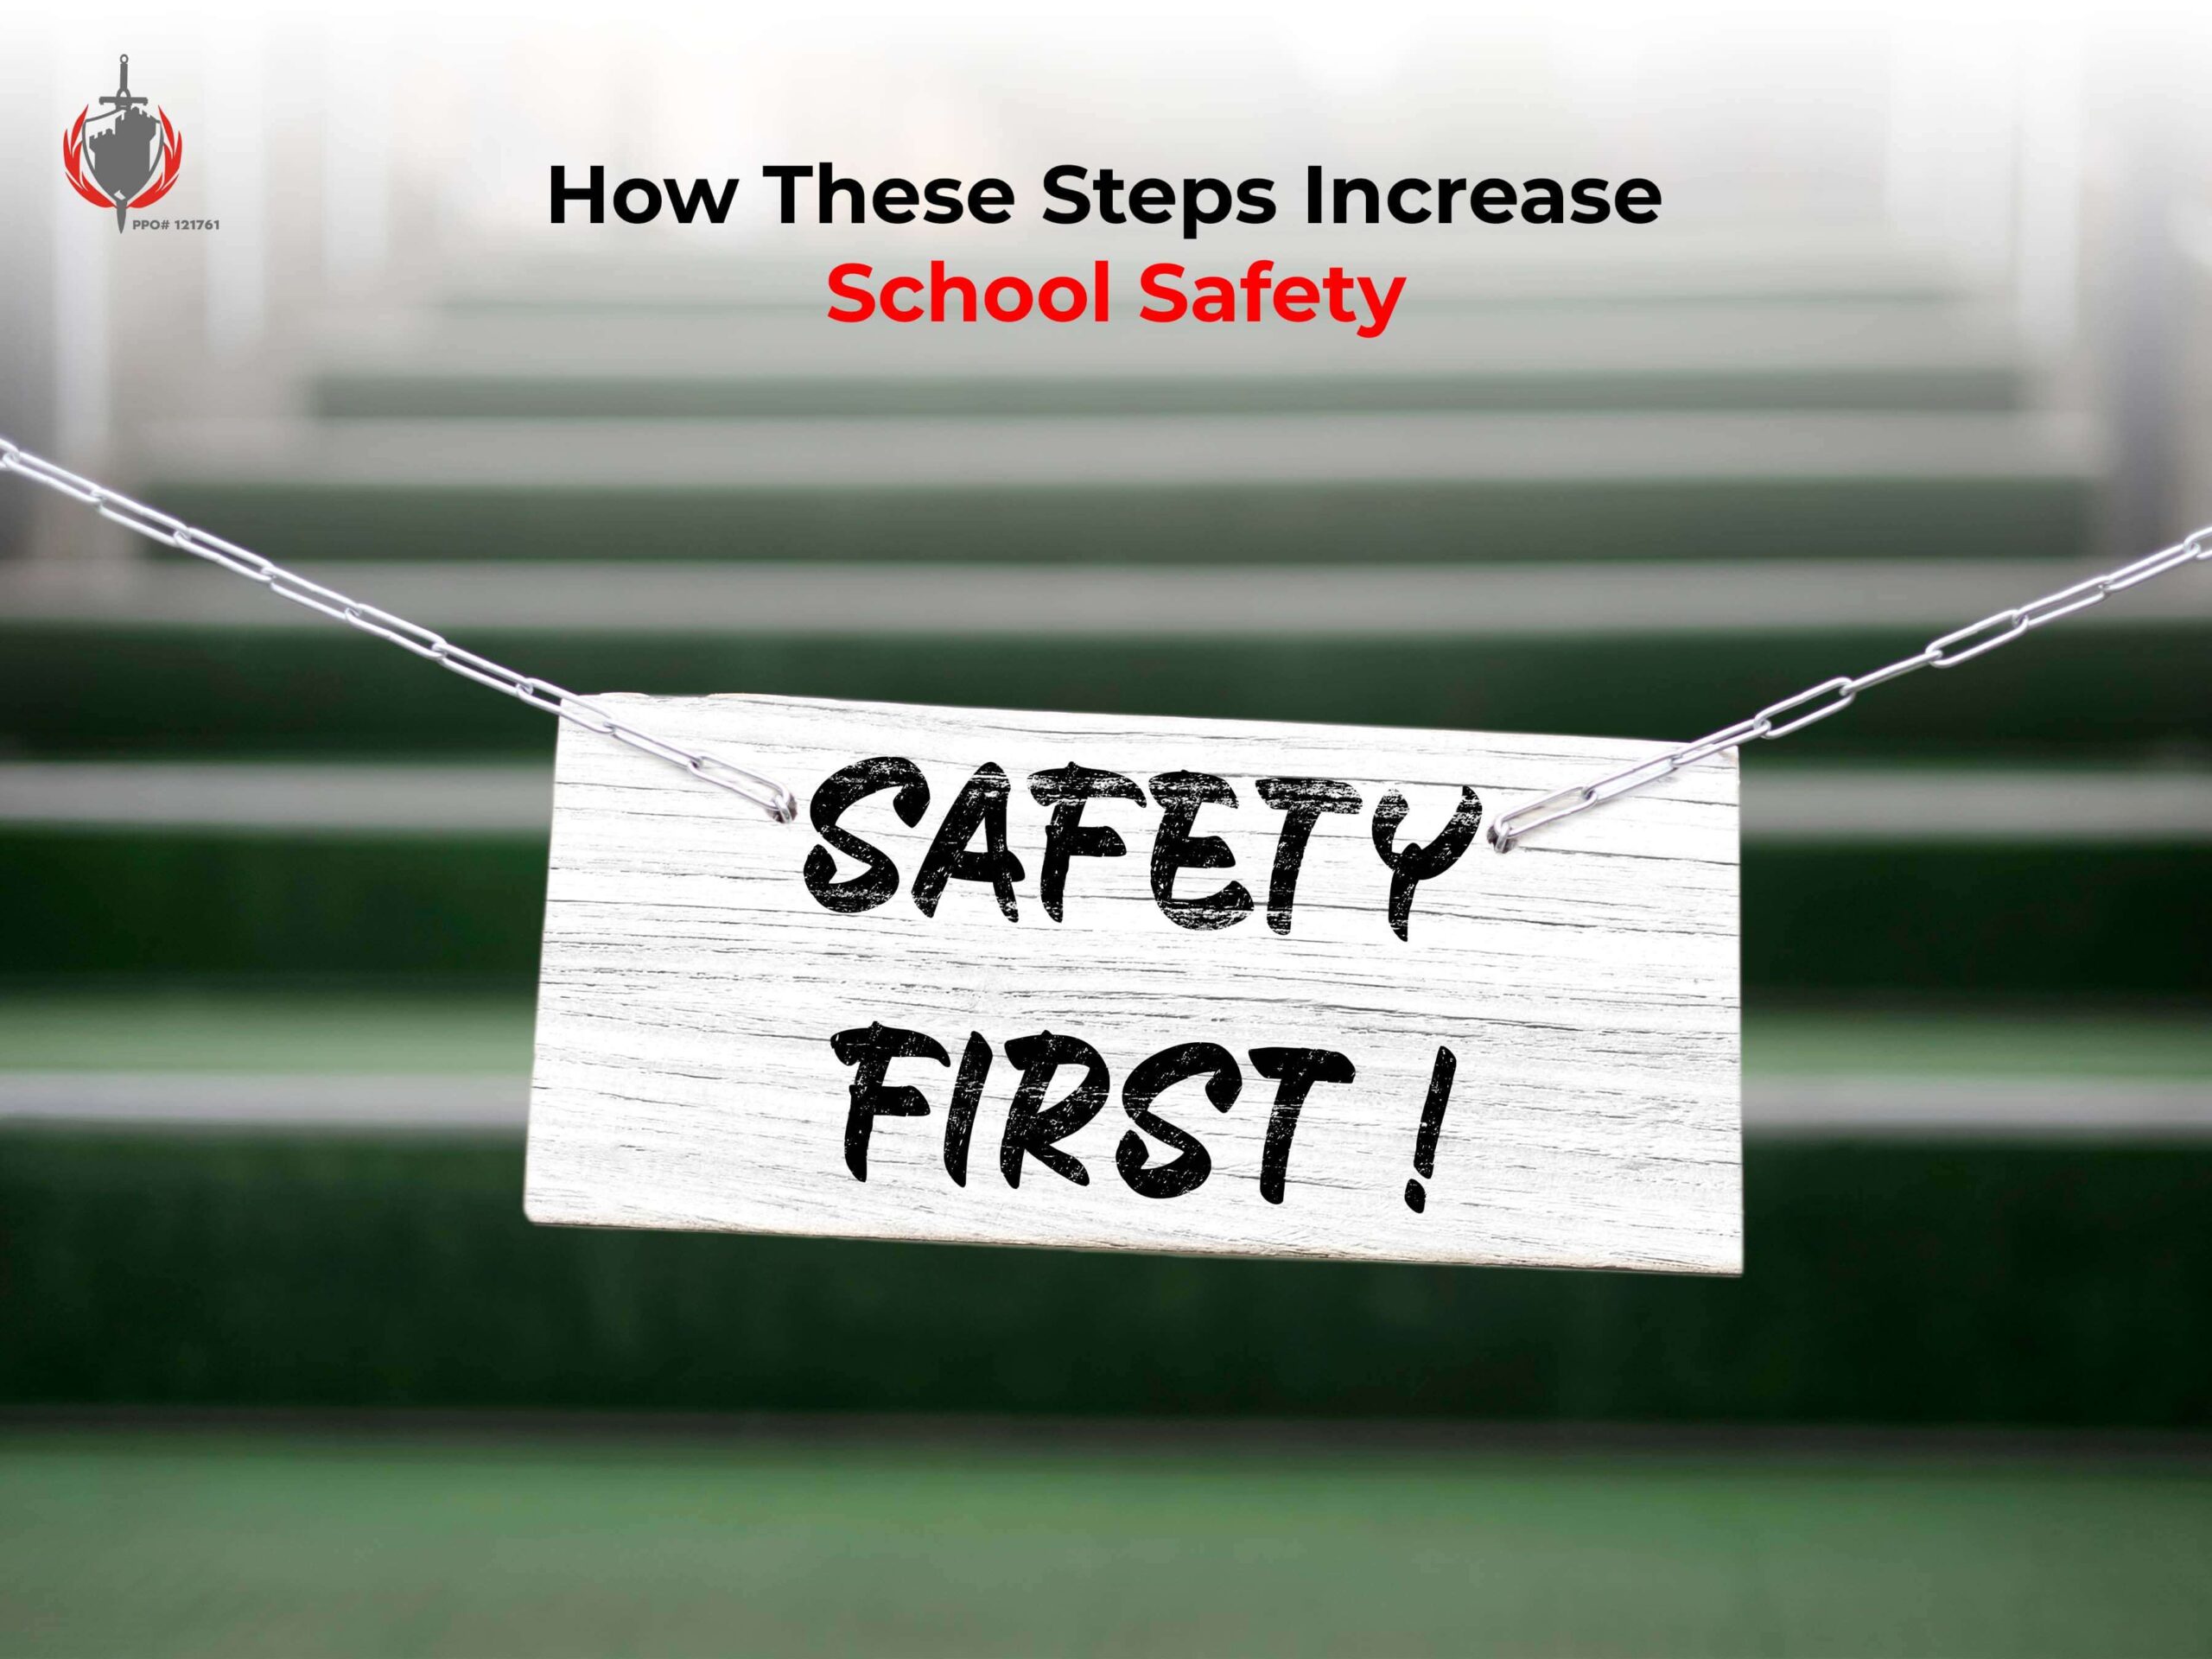 How These Steps Increase School Safety